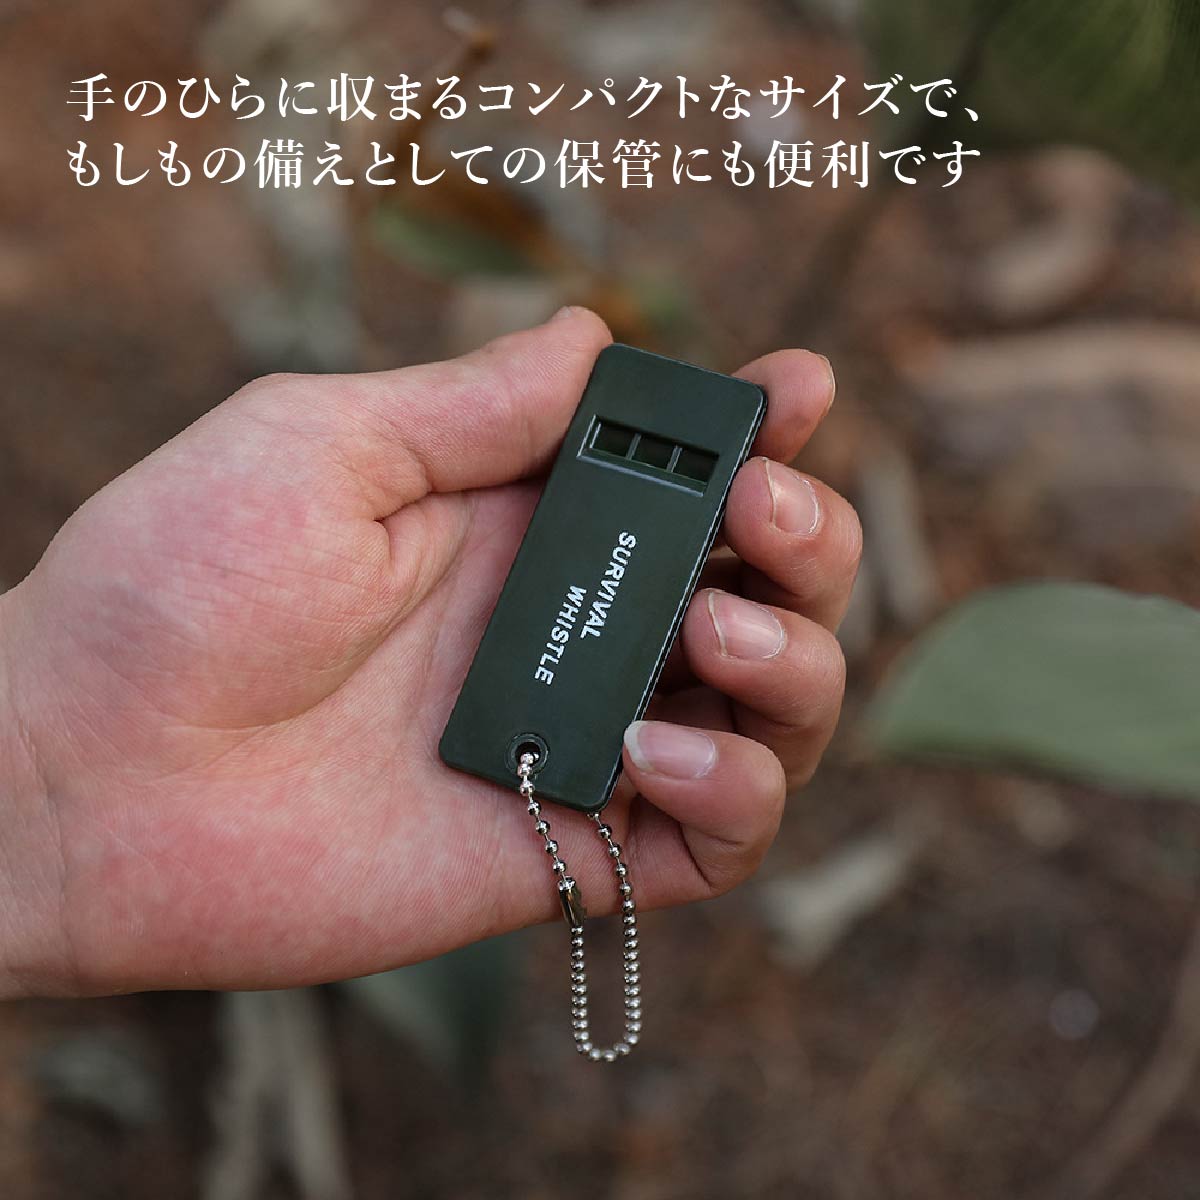  whistle disaster prevention pipe outdoor . defect signal mountain climbing camp bear .. with strap . thin type height sound large volume 